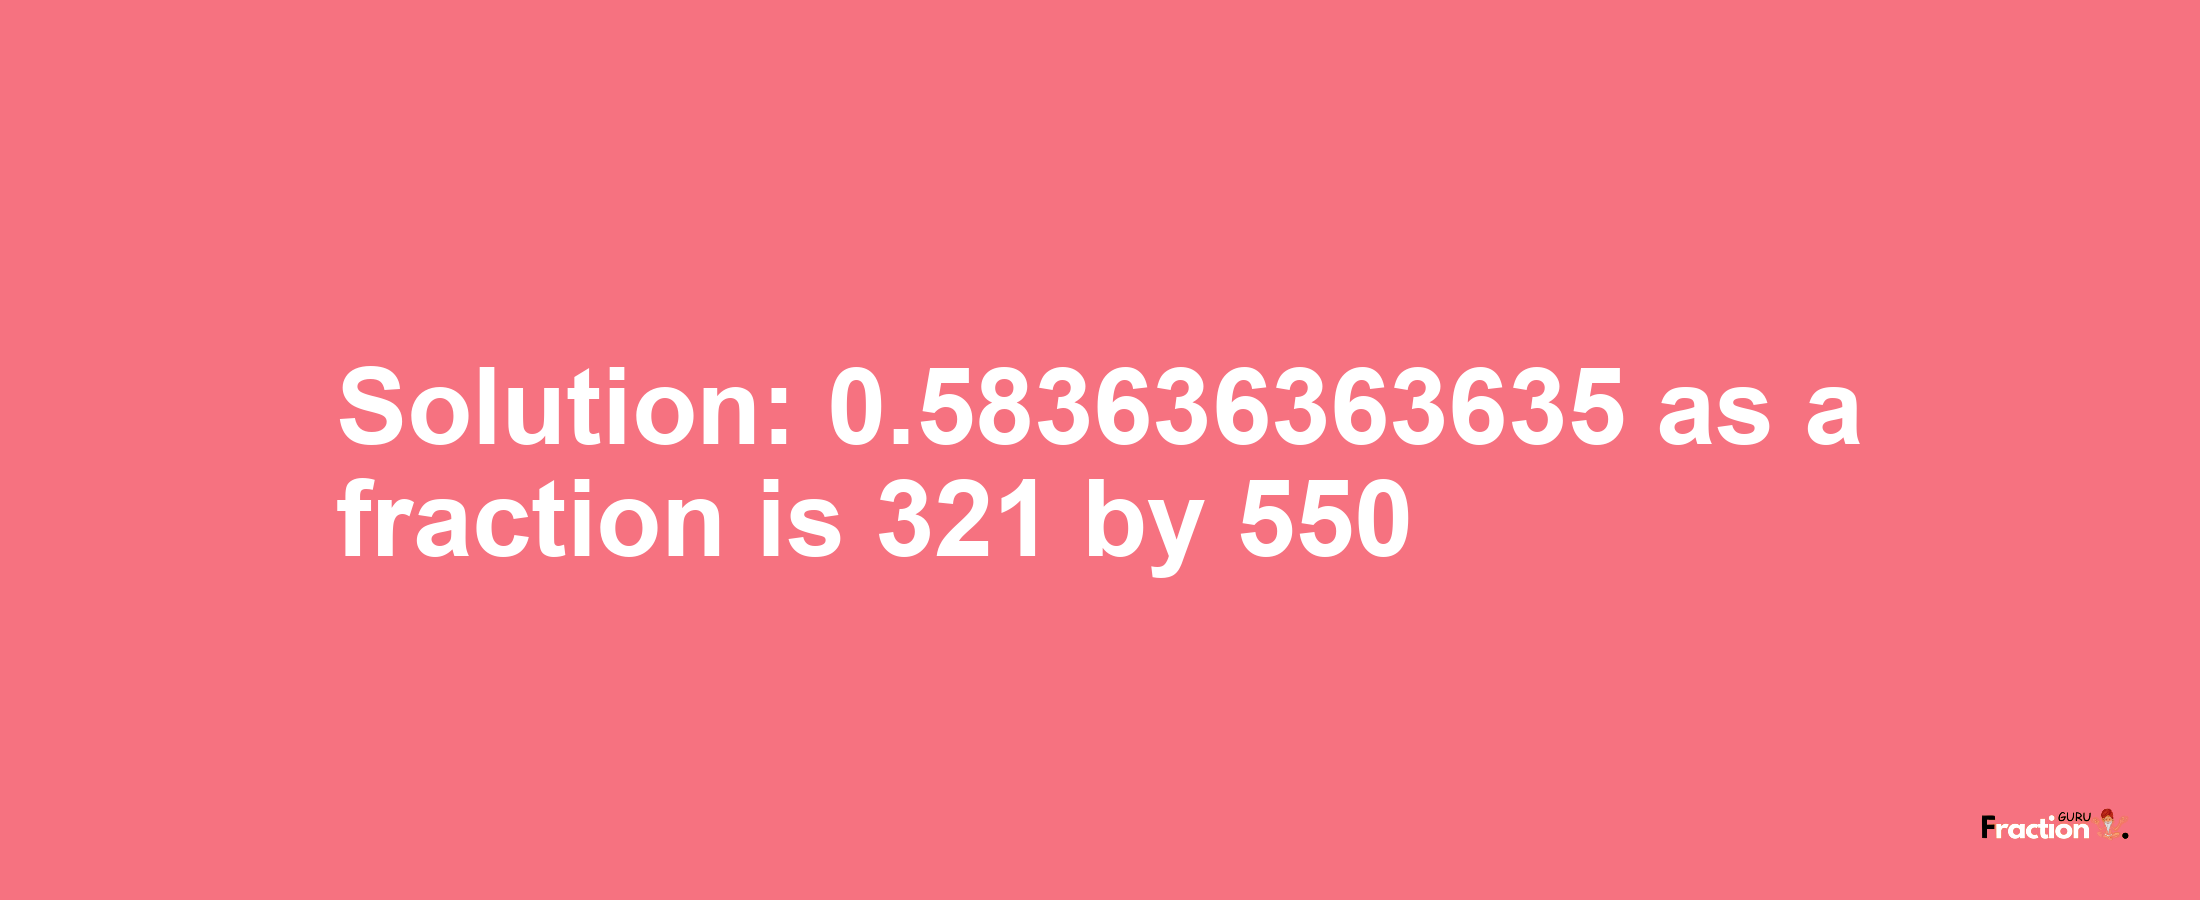 Solution:0.583636363635 as a fraction is 321/550